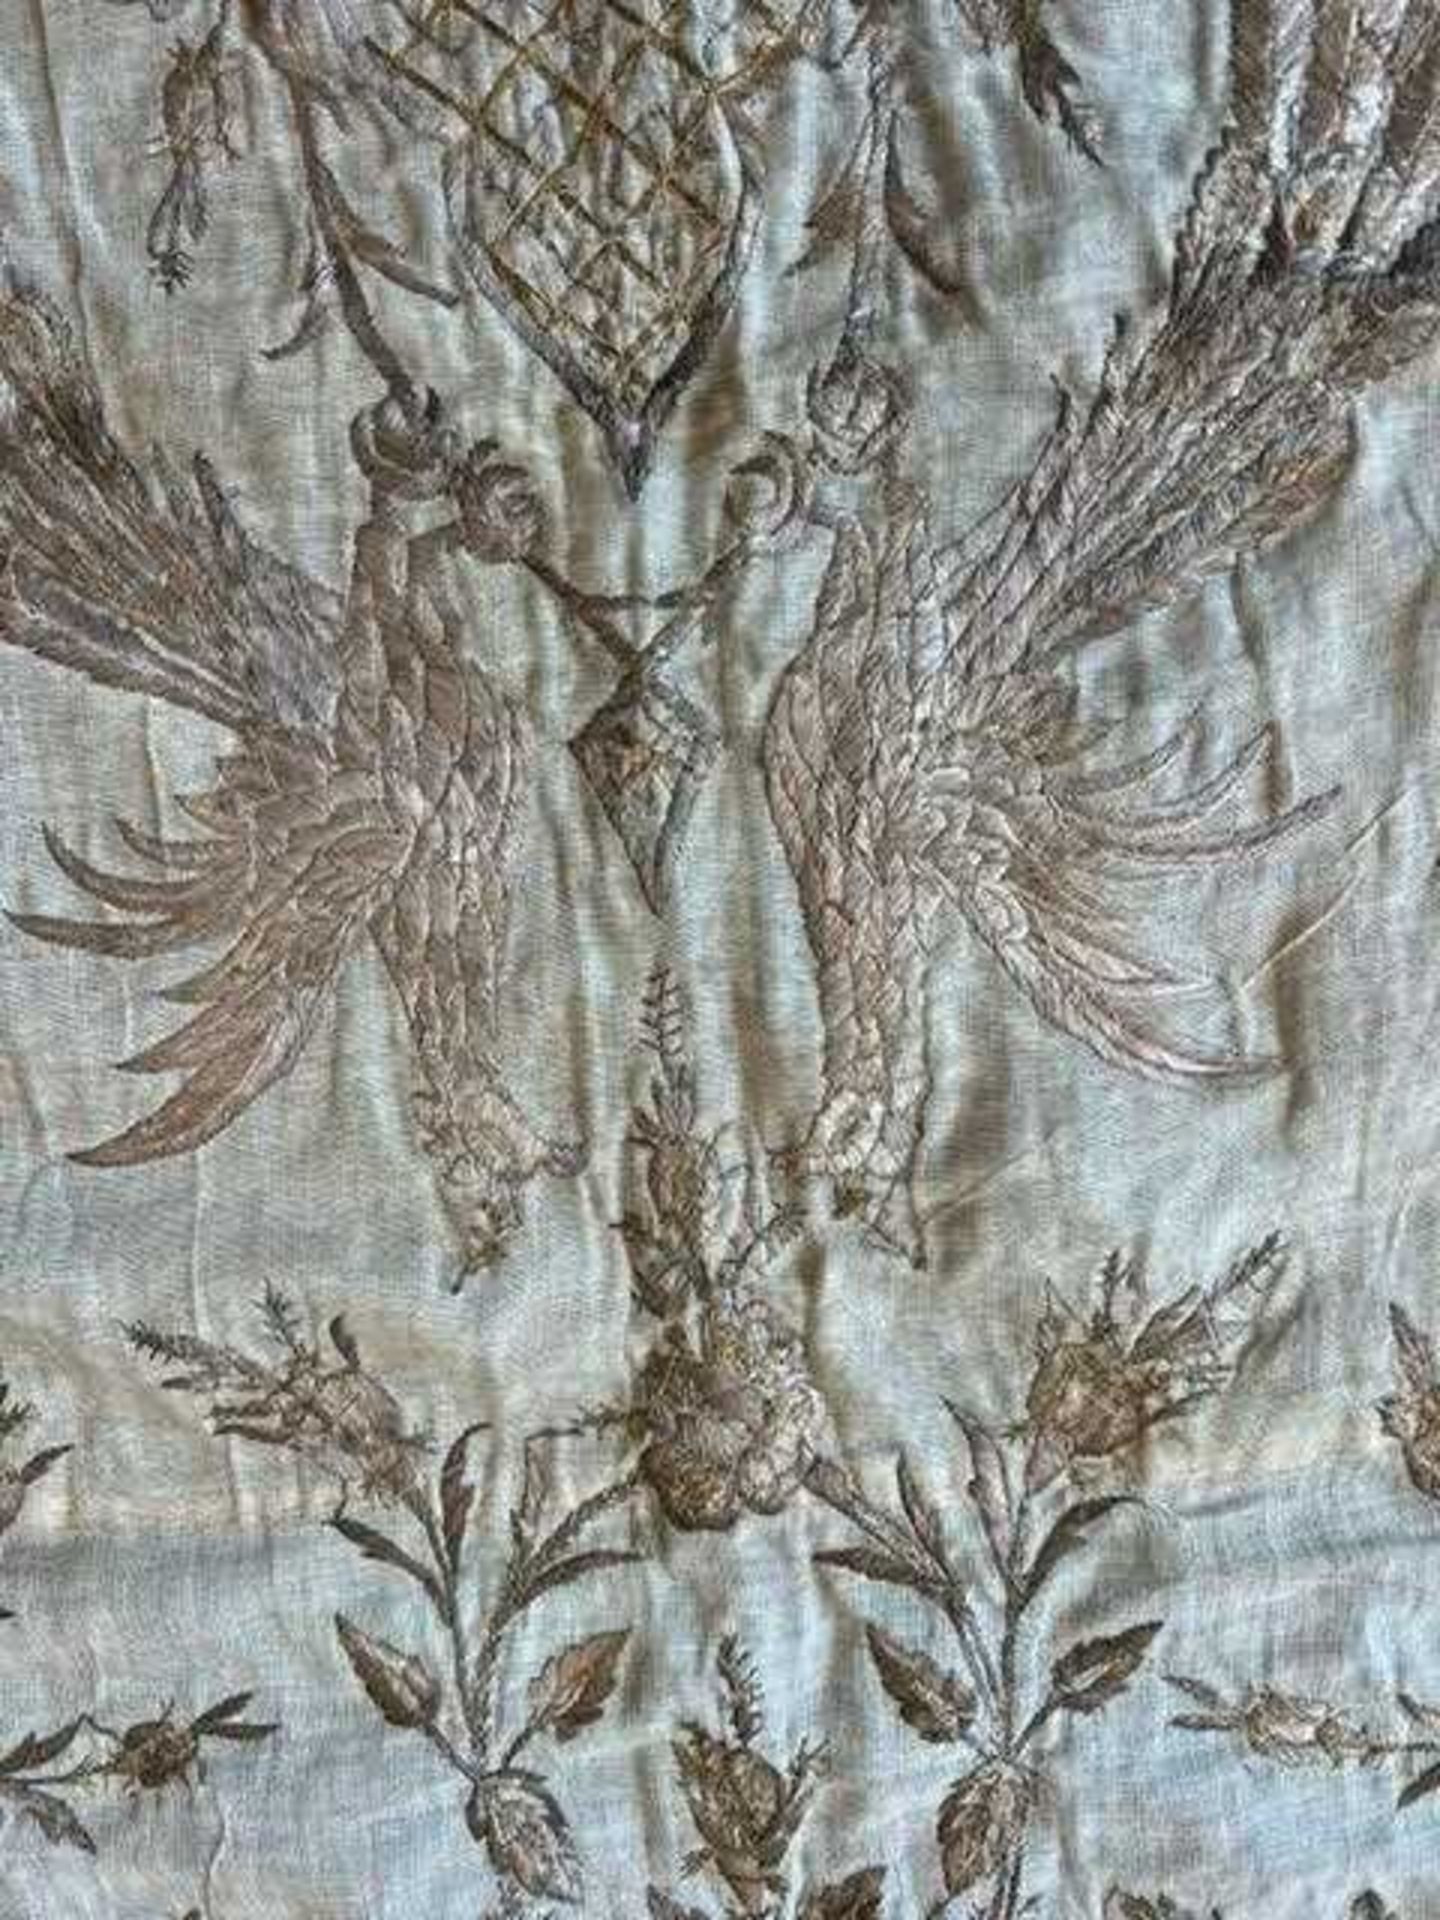 A 19TH CENTURY OTTOMAN GOLD AND SILVER THREAD EMBROIDERED BANNER - Image 9 of 18